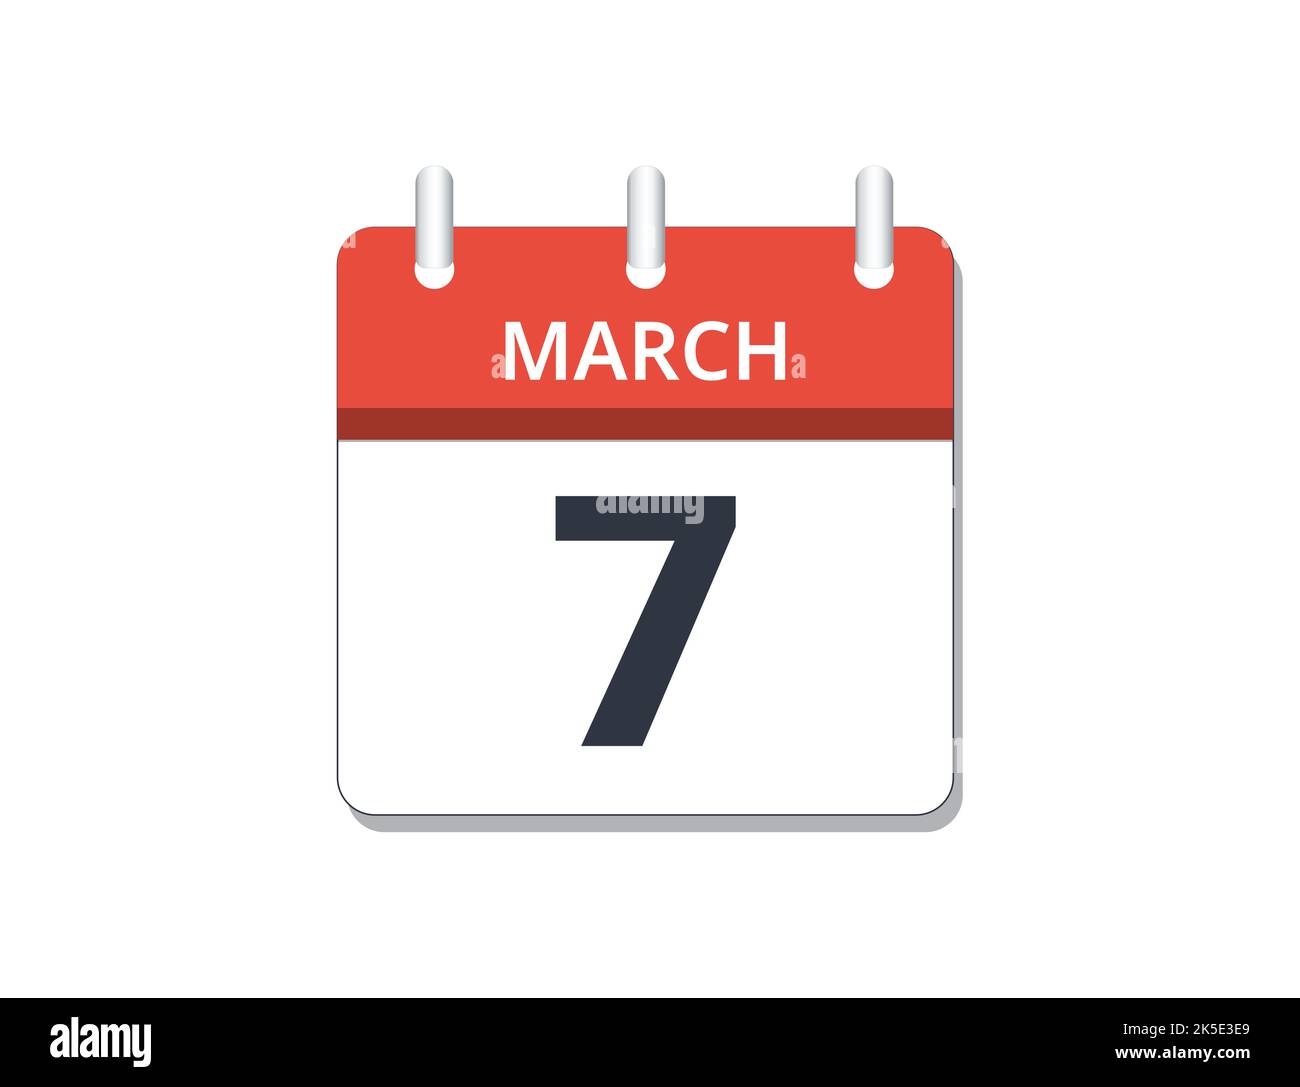 March, 7th calendar icon vector. Concept of schedule, business and tasks Stock Vector